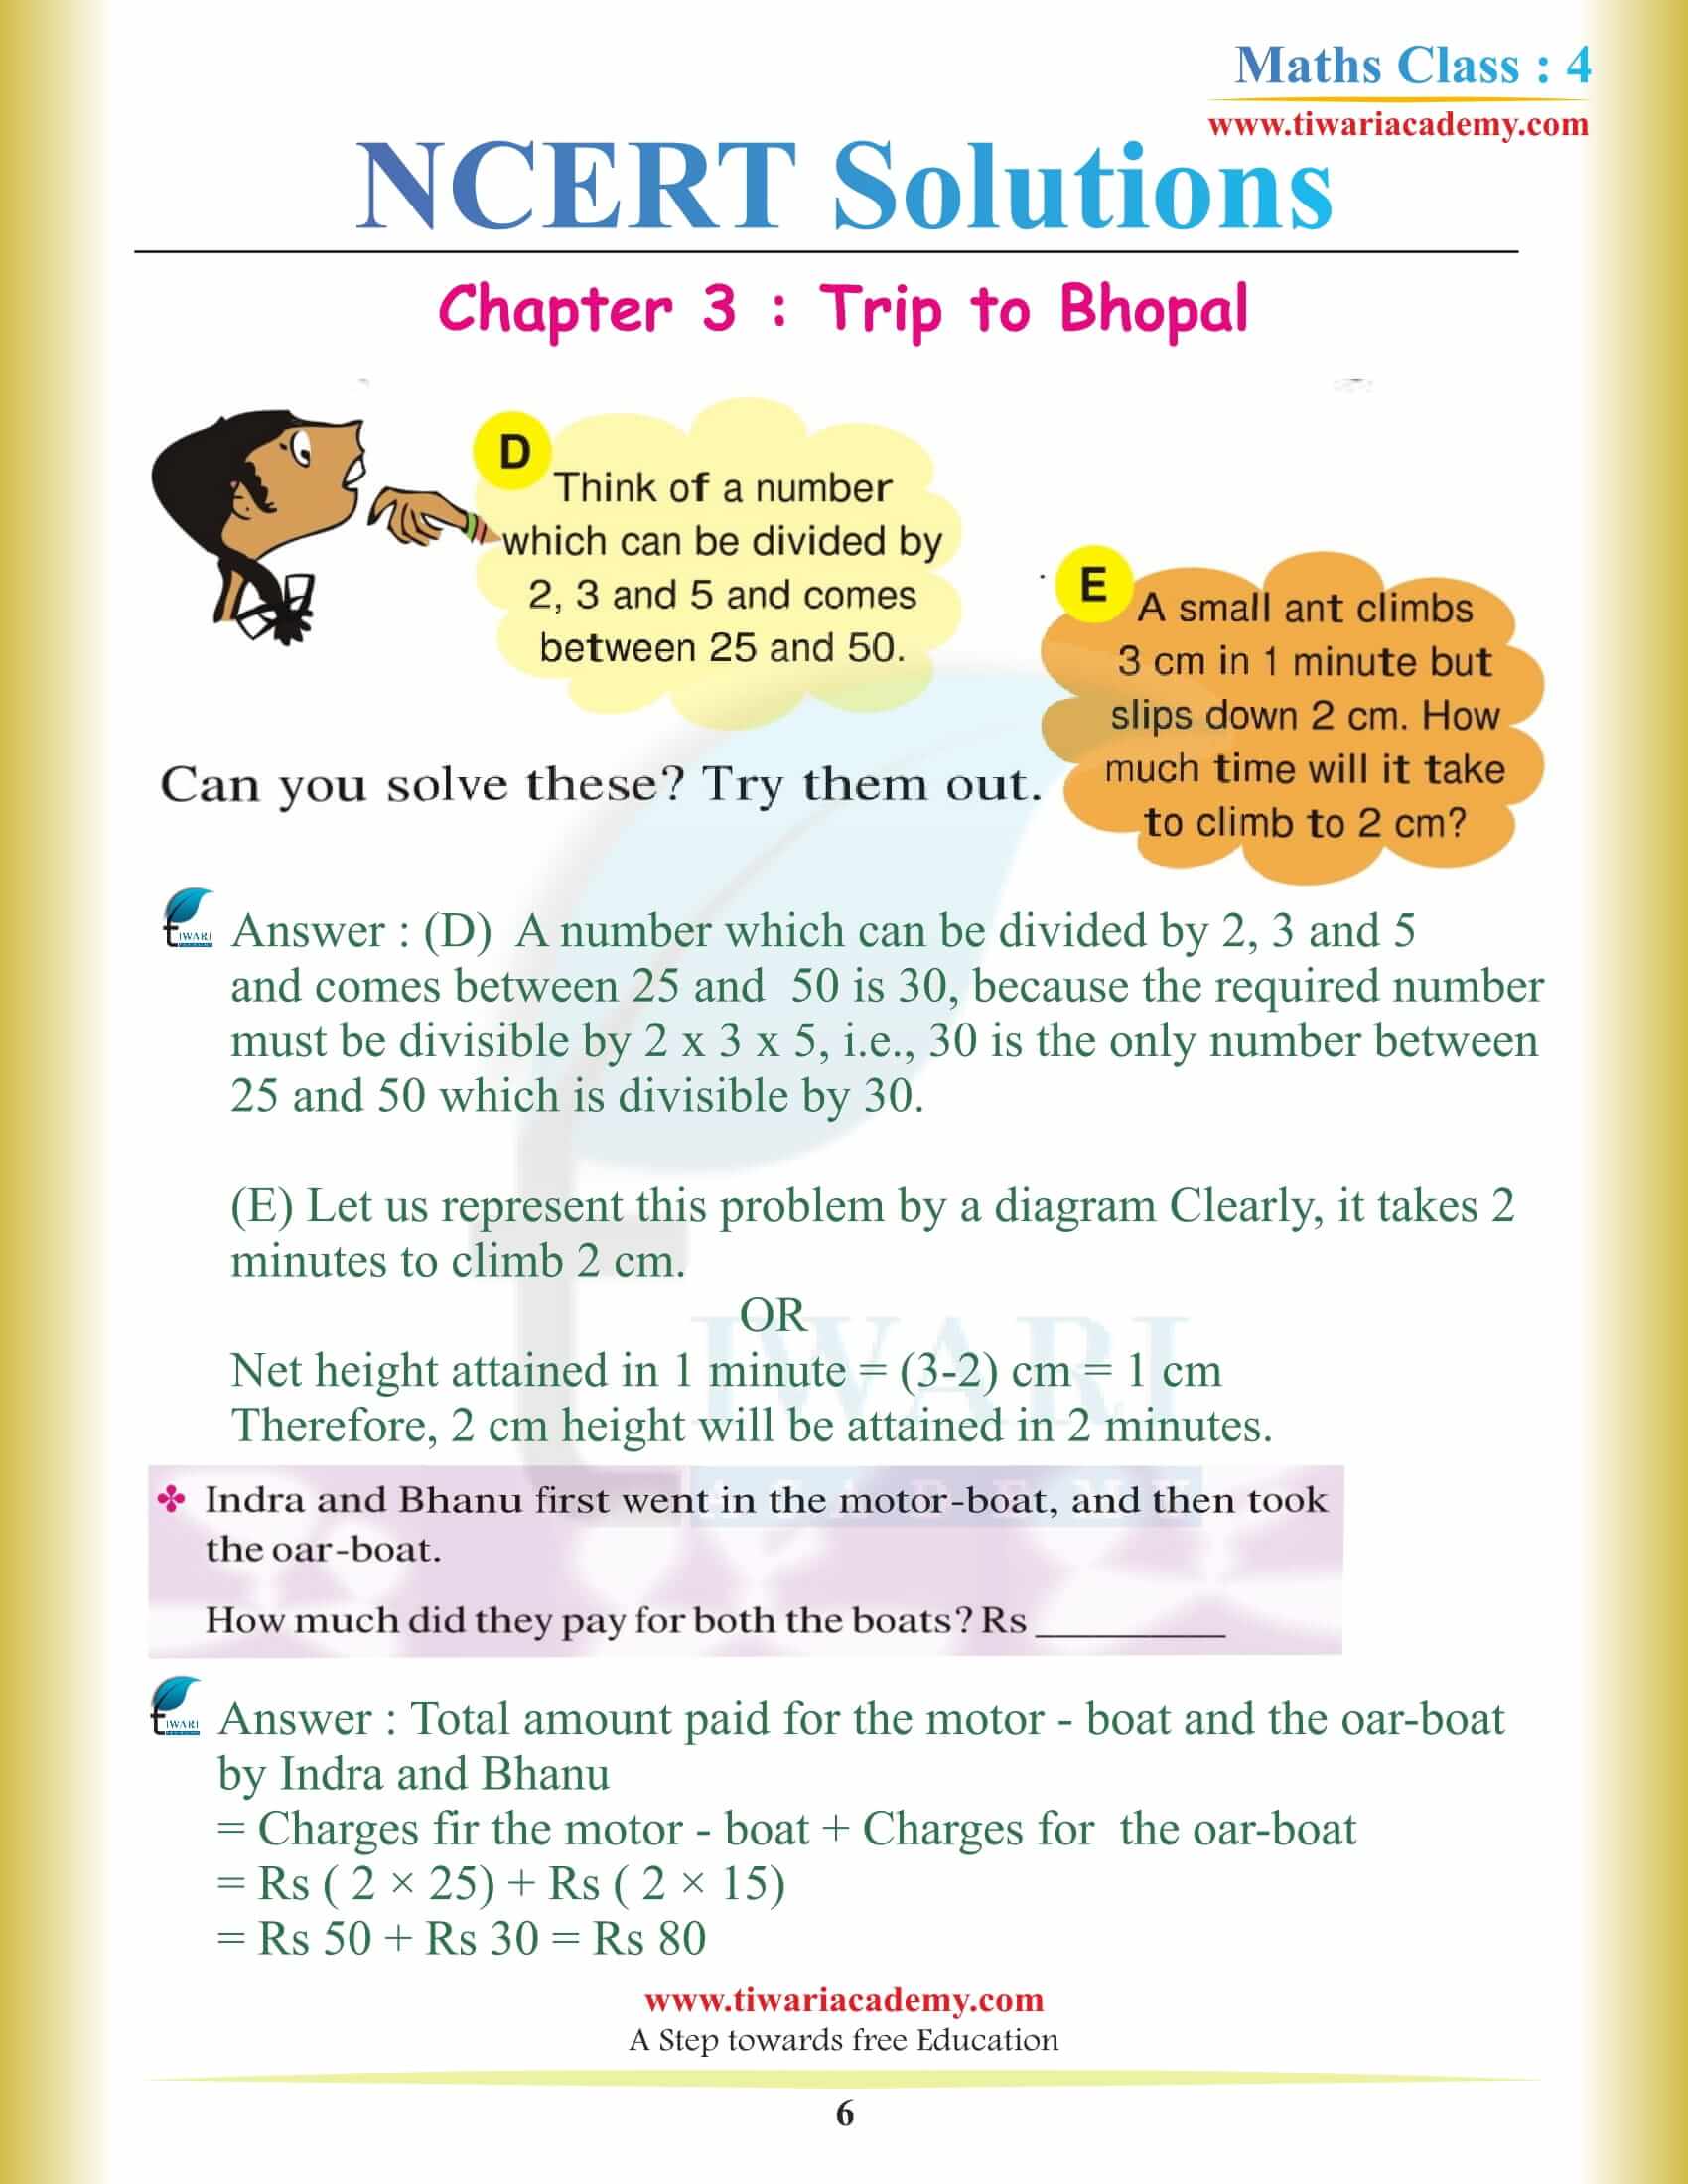 NCERT Solutions for Class 4 Maths Chapter 3 download